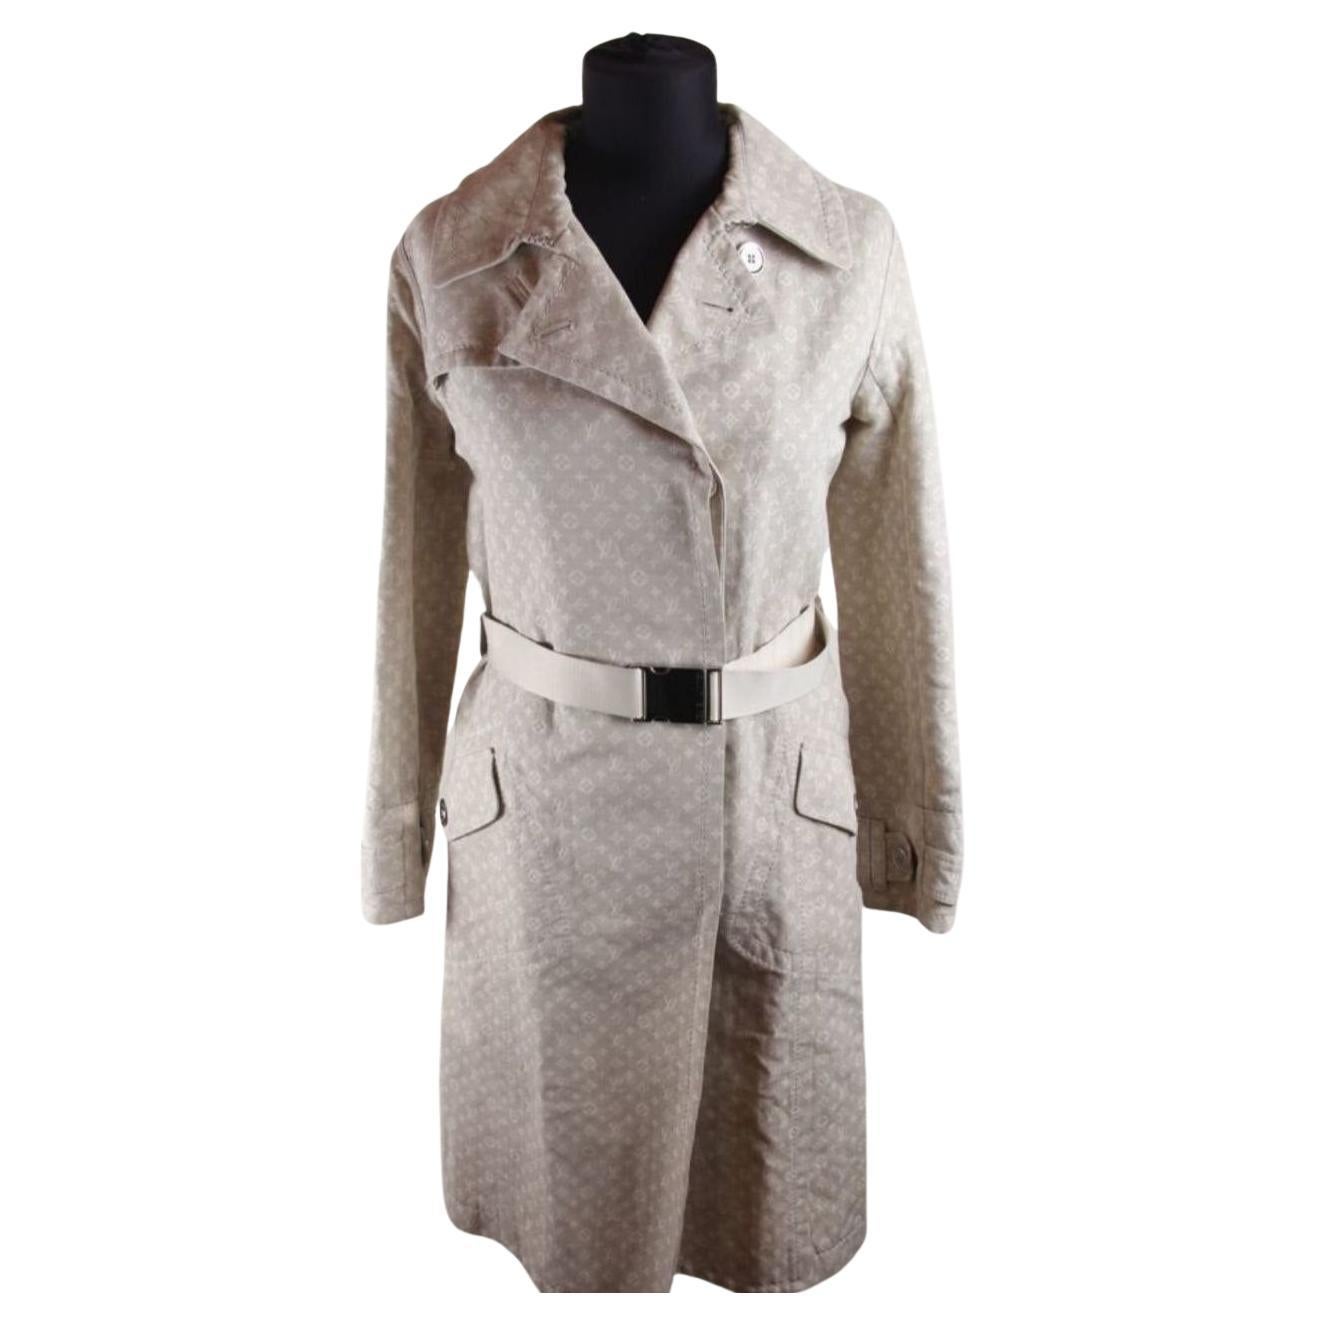 Louis Vuitton double breasted belted logo monogram trench coat women 